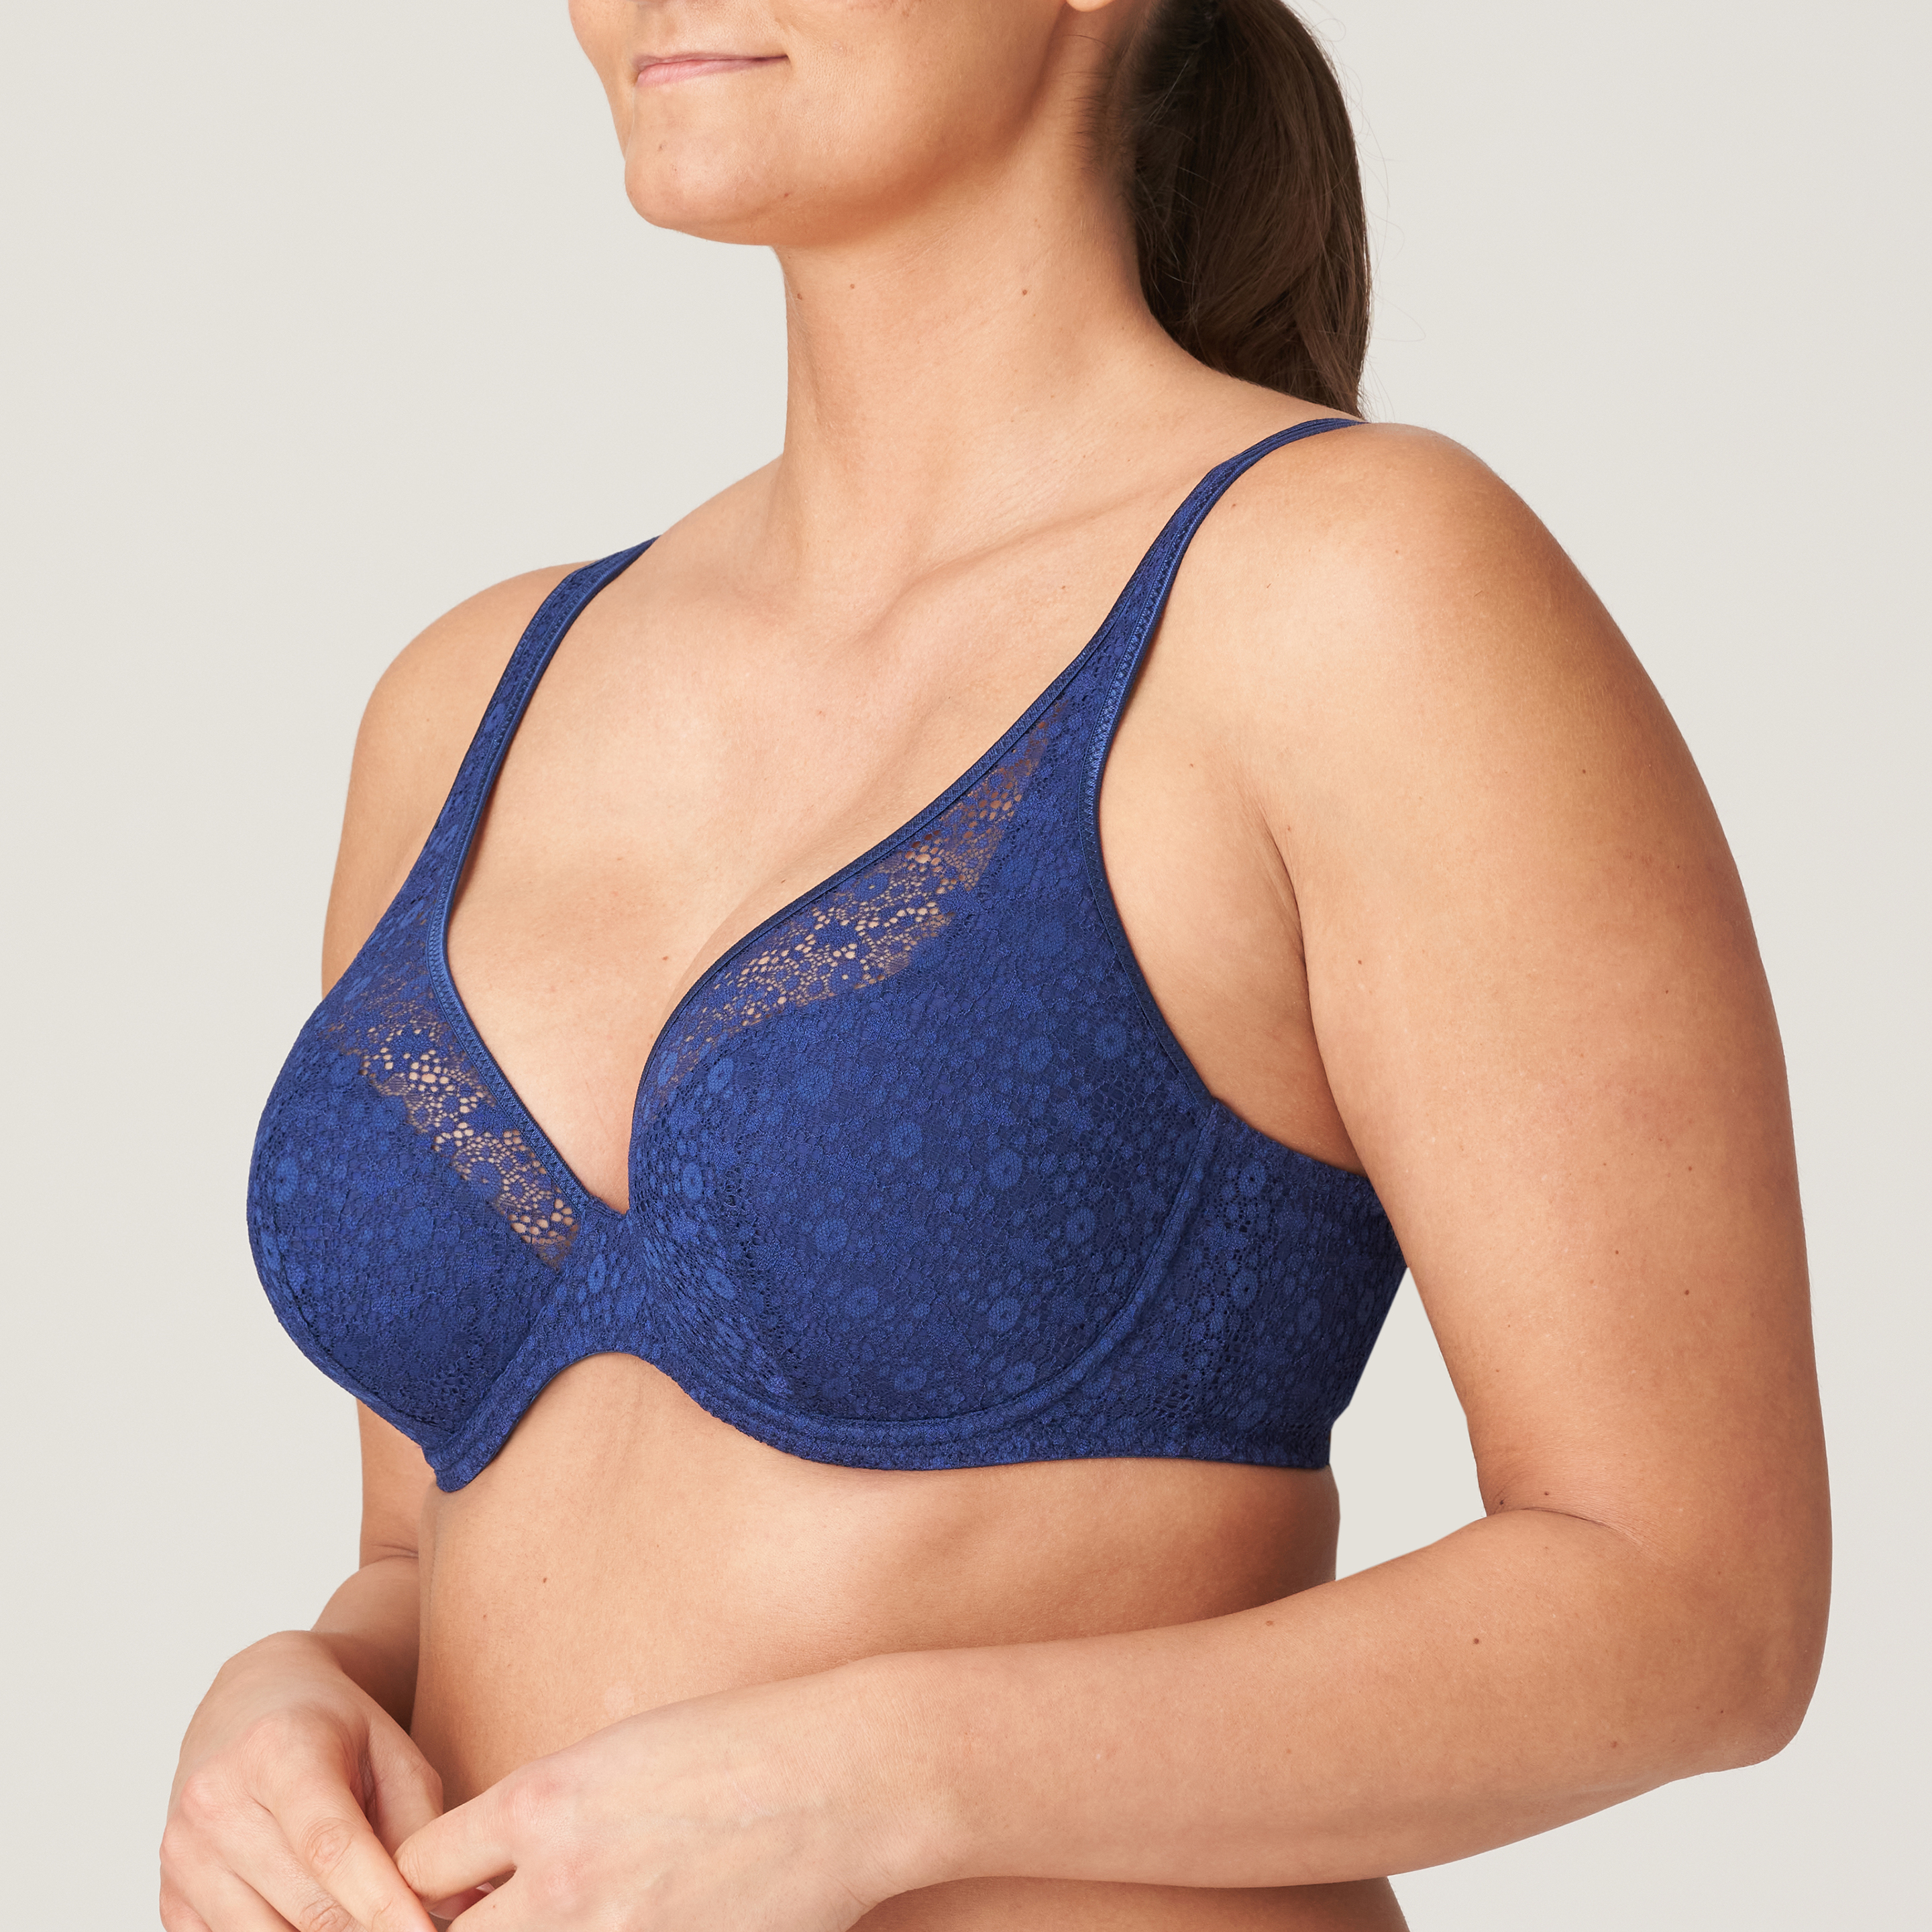 Currans of Kerrisdale - Our favourite deep plunge bra, Epirus by  @primadonnalingerie is now available in the ultra feminine, fifties pink!  💕 📍available in store and online for a limited time only!